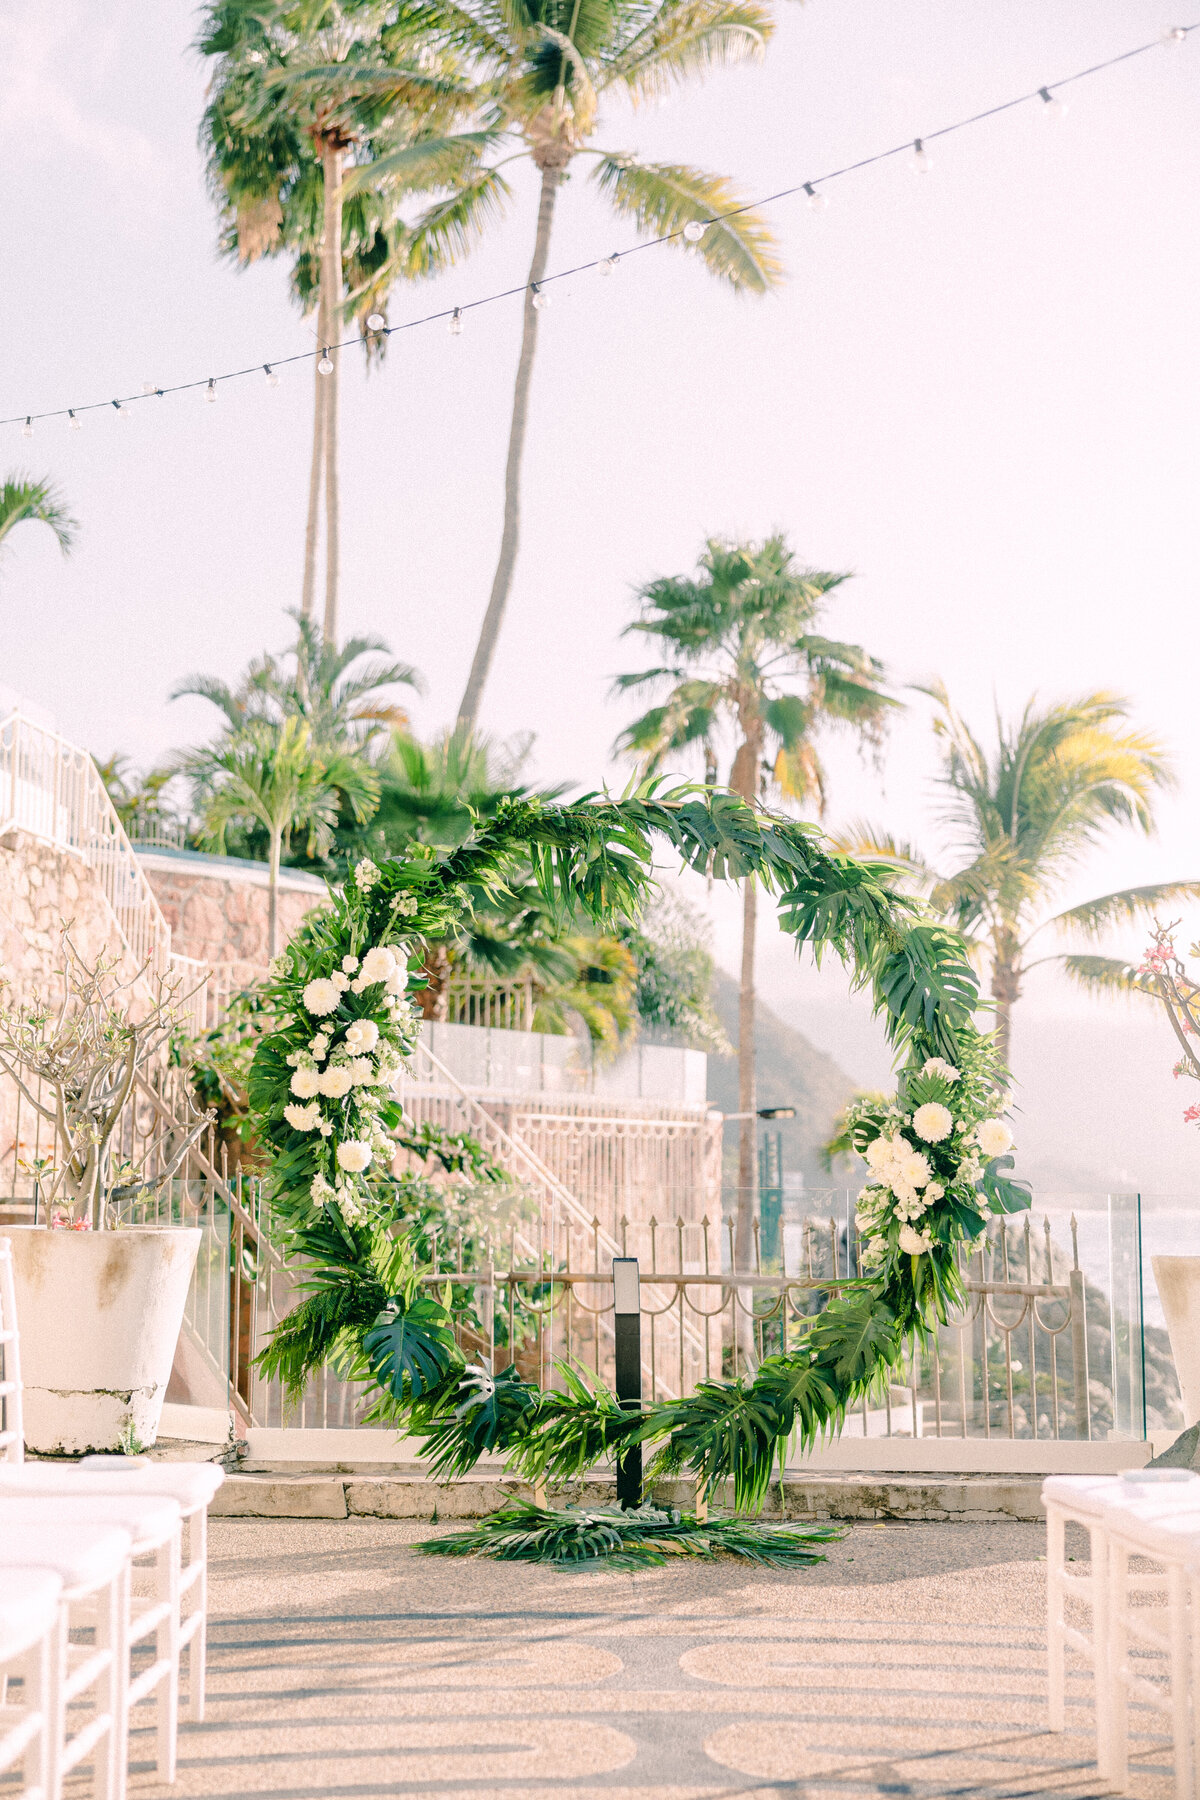 Destination Wedding Photographer captures a floral archway at an outdoor wedding venue with palm trees and string lights in the background.